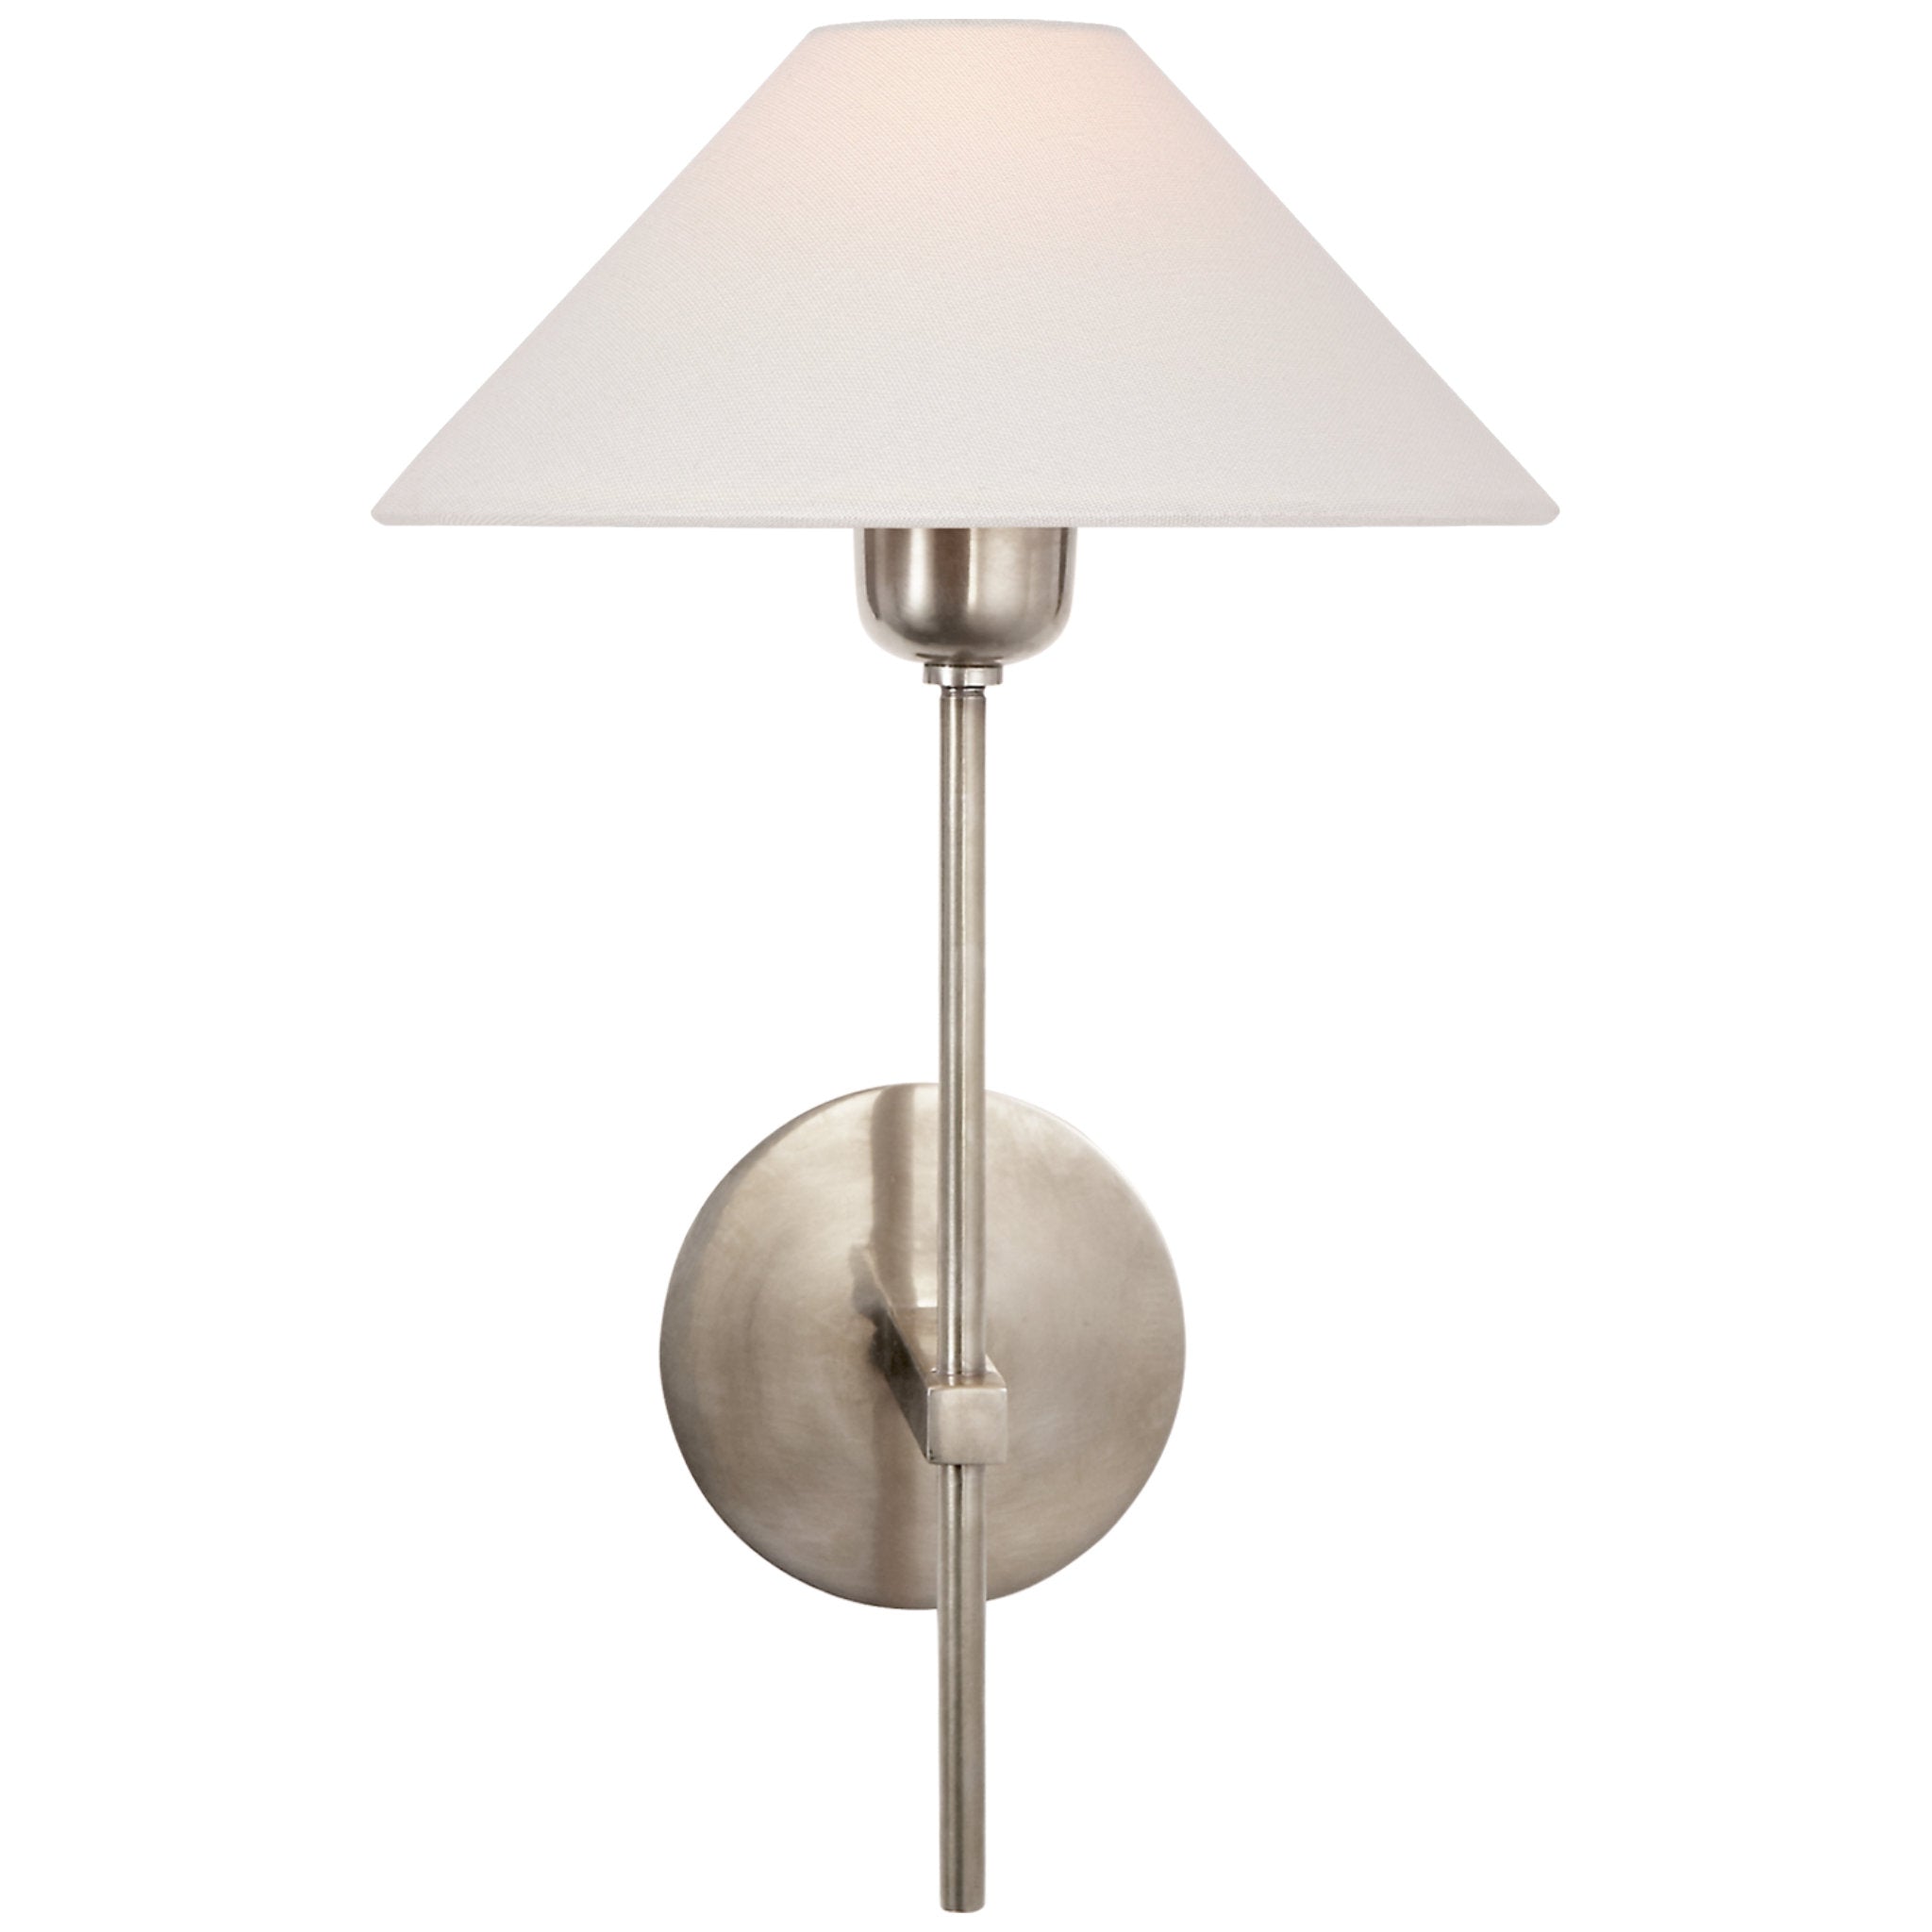 J. Randall Powers Hackney Single Sconce in Antique Nickel with Linen Shade